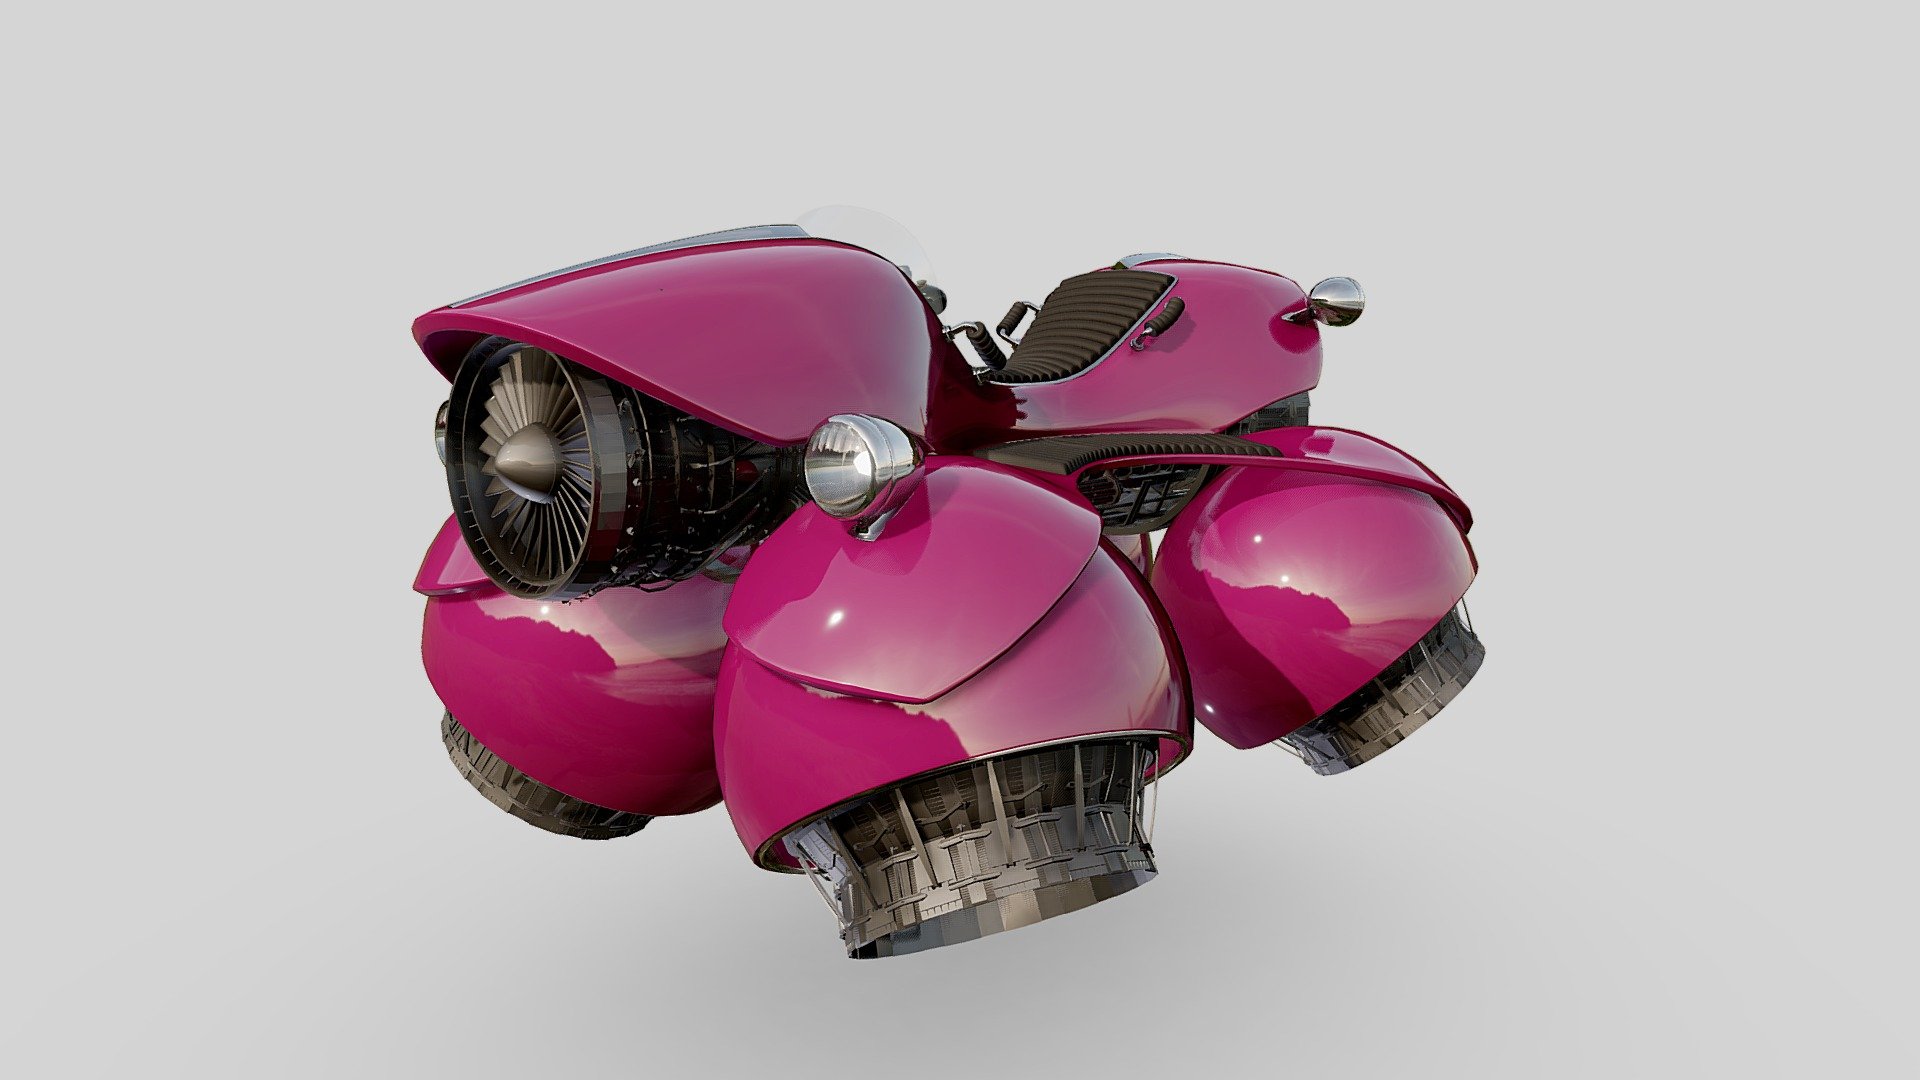 Here is a retro-futurist hovercraft or space motorcycle 3d model